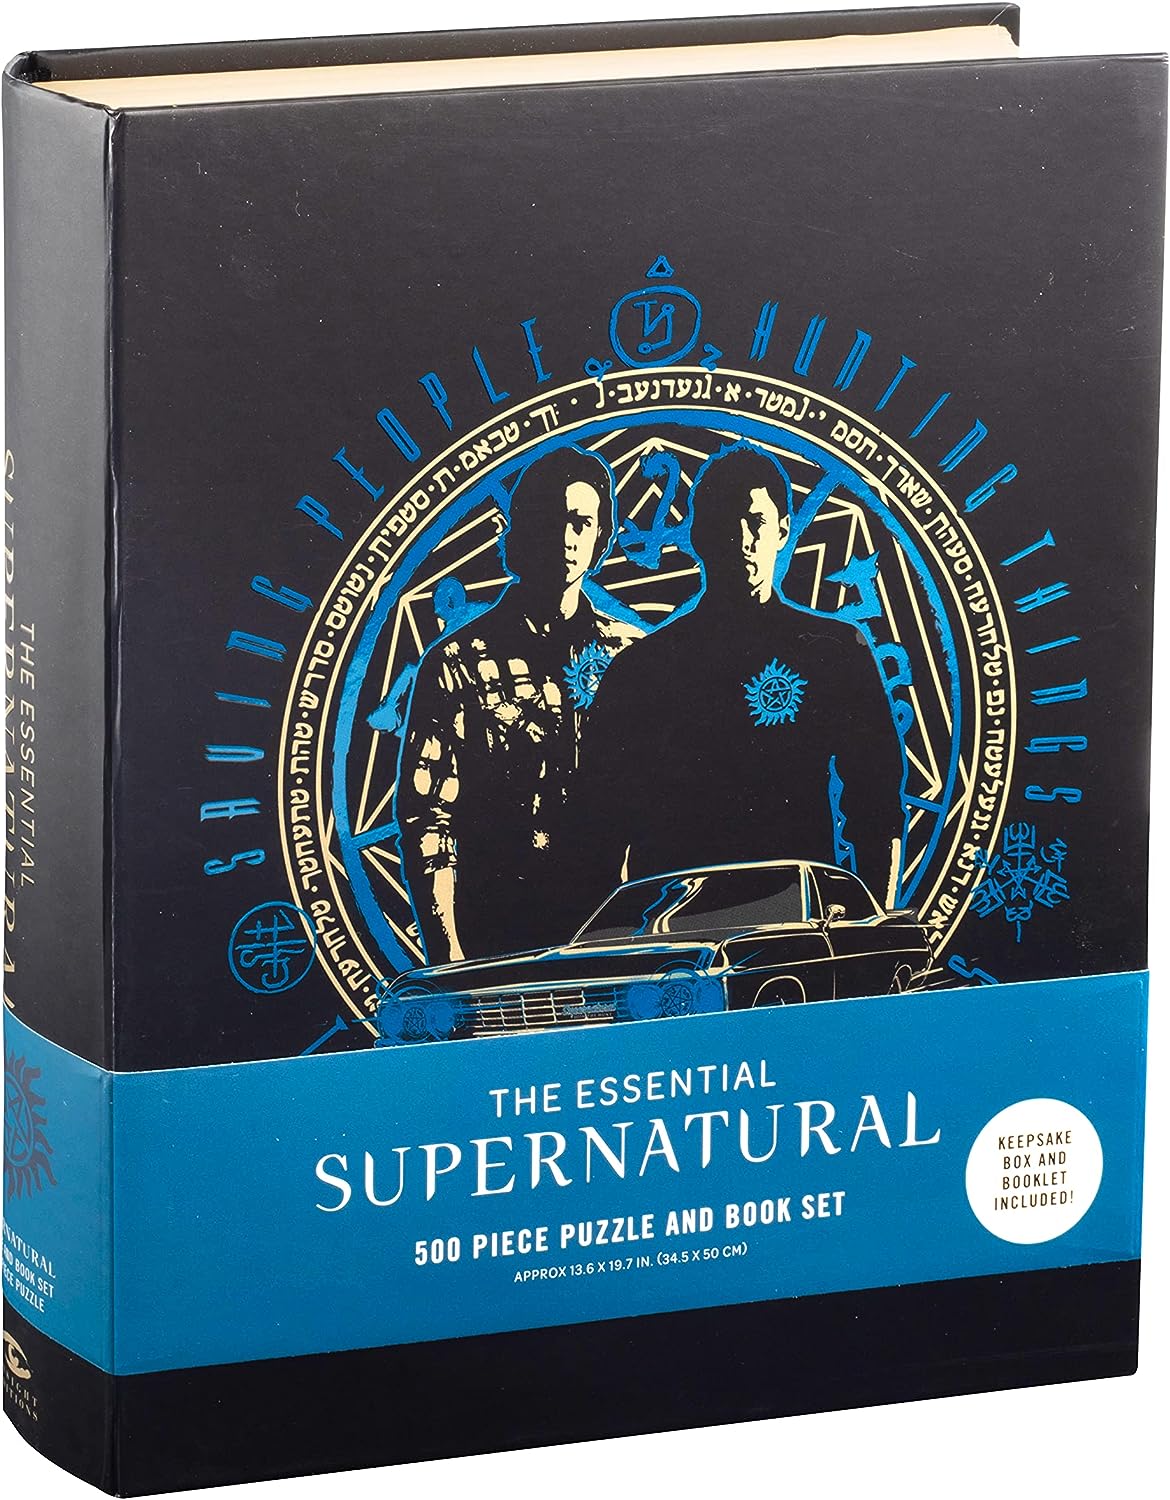 A black book on a white background. On the cover is a white and blue drawing of Sam and Dean Winchester, inside a circle with runes around the edge. Under them is a drawing of Baby. At the bottom is a blue banner with white text saying "The essential supernatural 500 piece puzzle and book set."